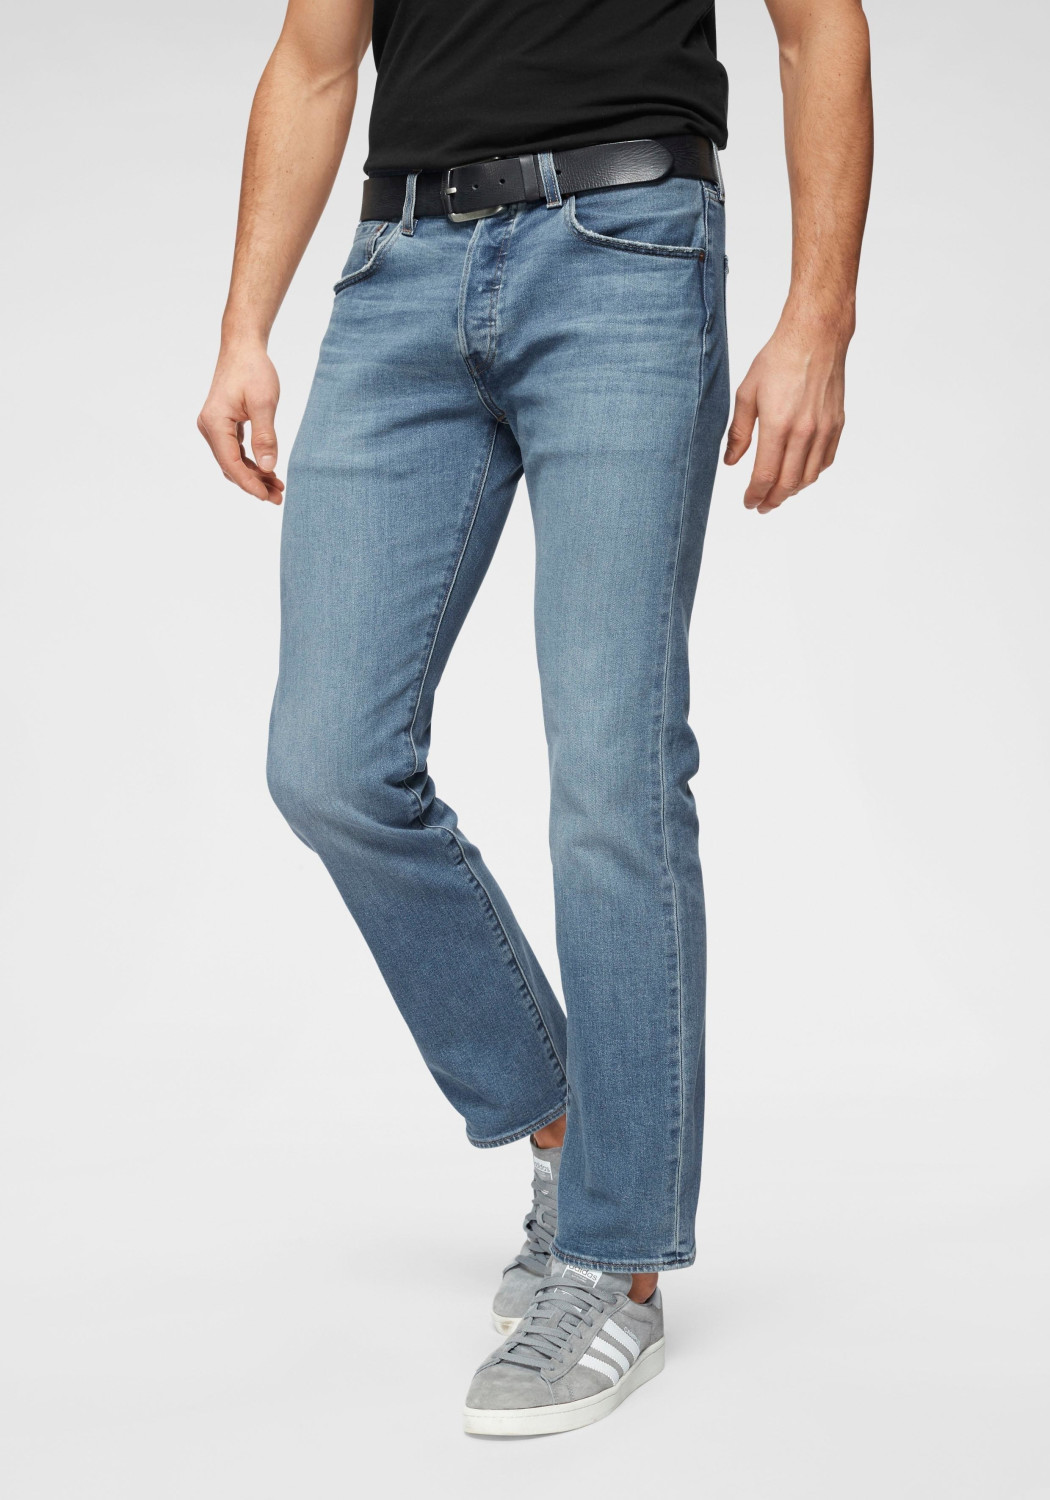 Buy Levi's 501 Original Fit ironwood from £61.00 (Today) – Best Deals ...